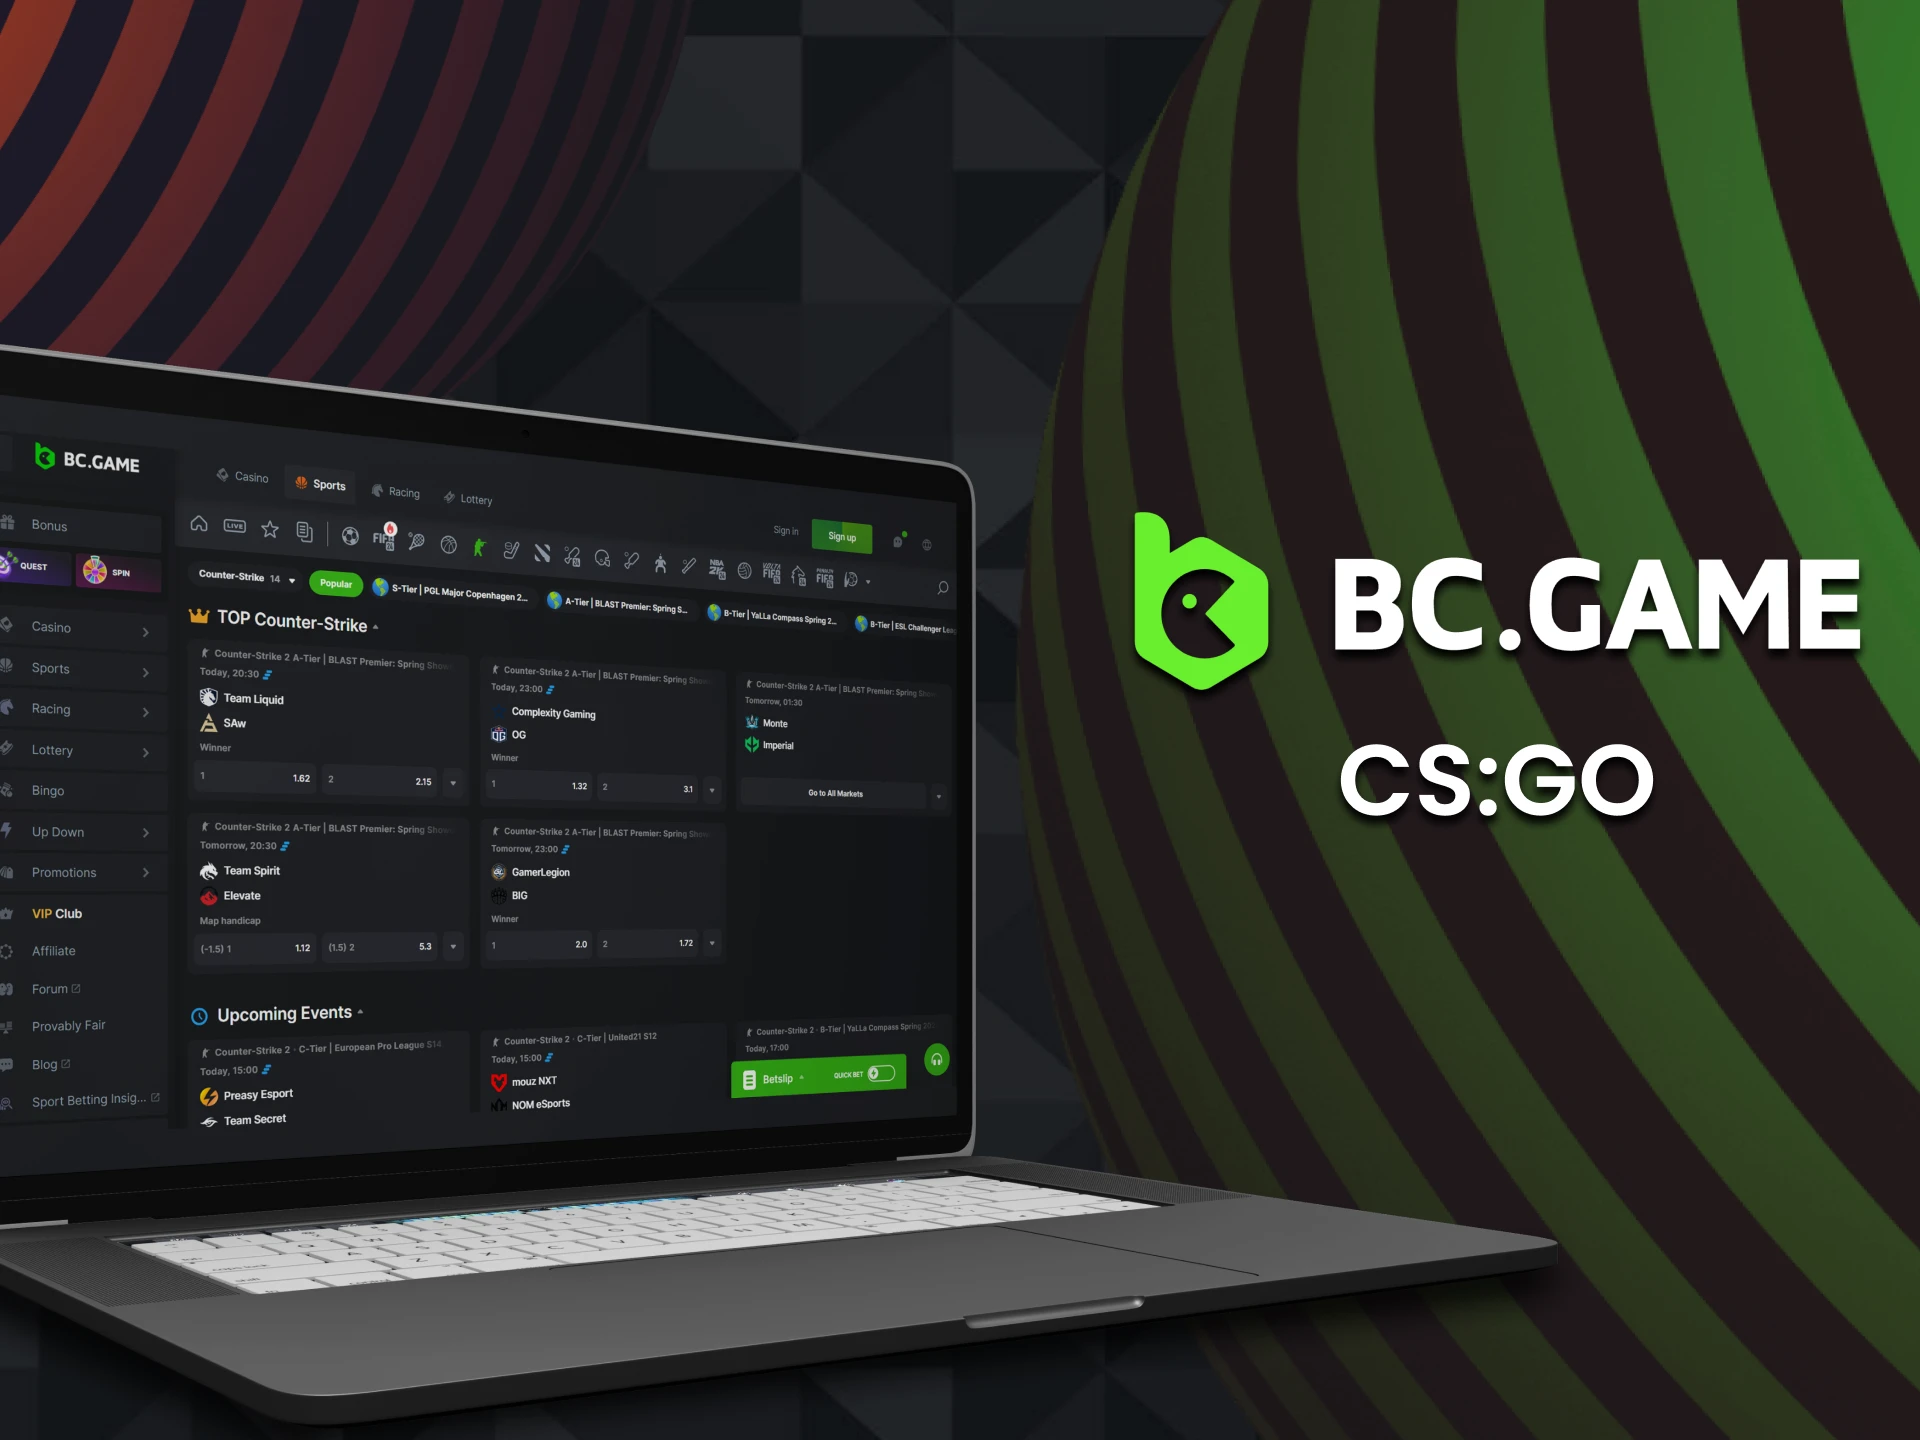 For eSports betting from BC Game, try CS:GO.